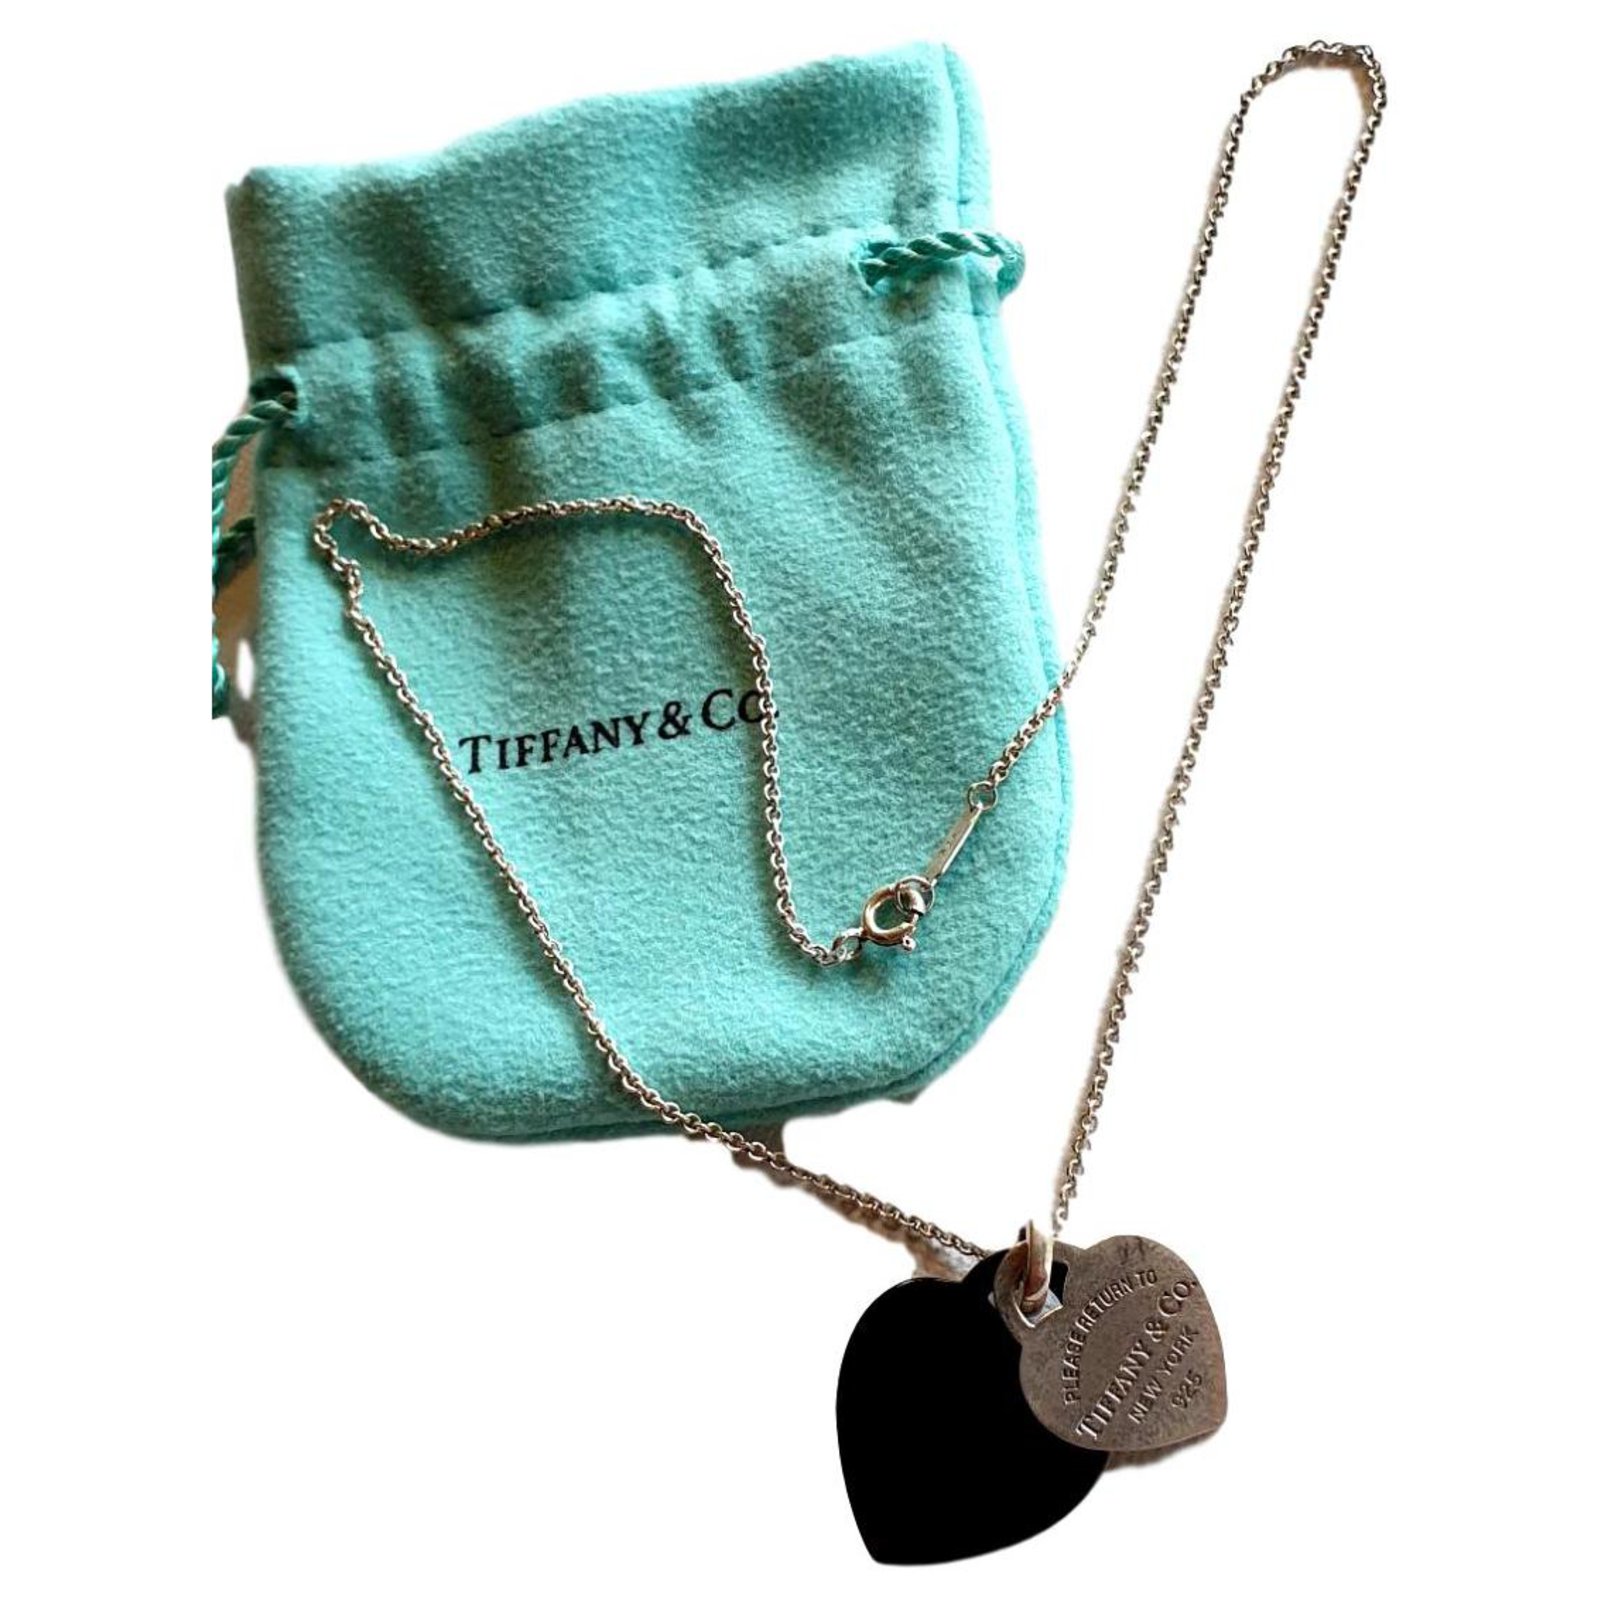 Tiffany & Co Large Carved Heart Silk Cord Necklace Pendant Silver CLEARANCE